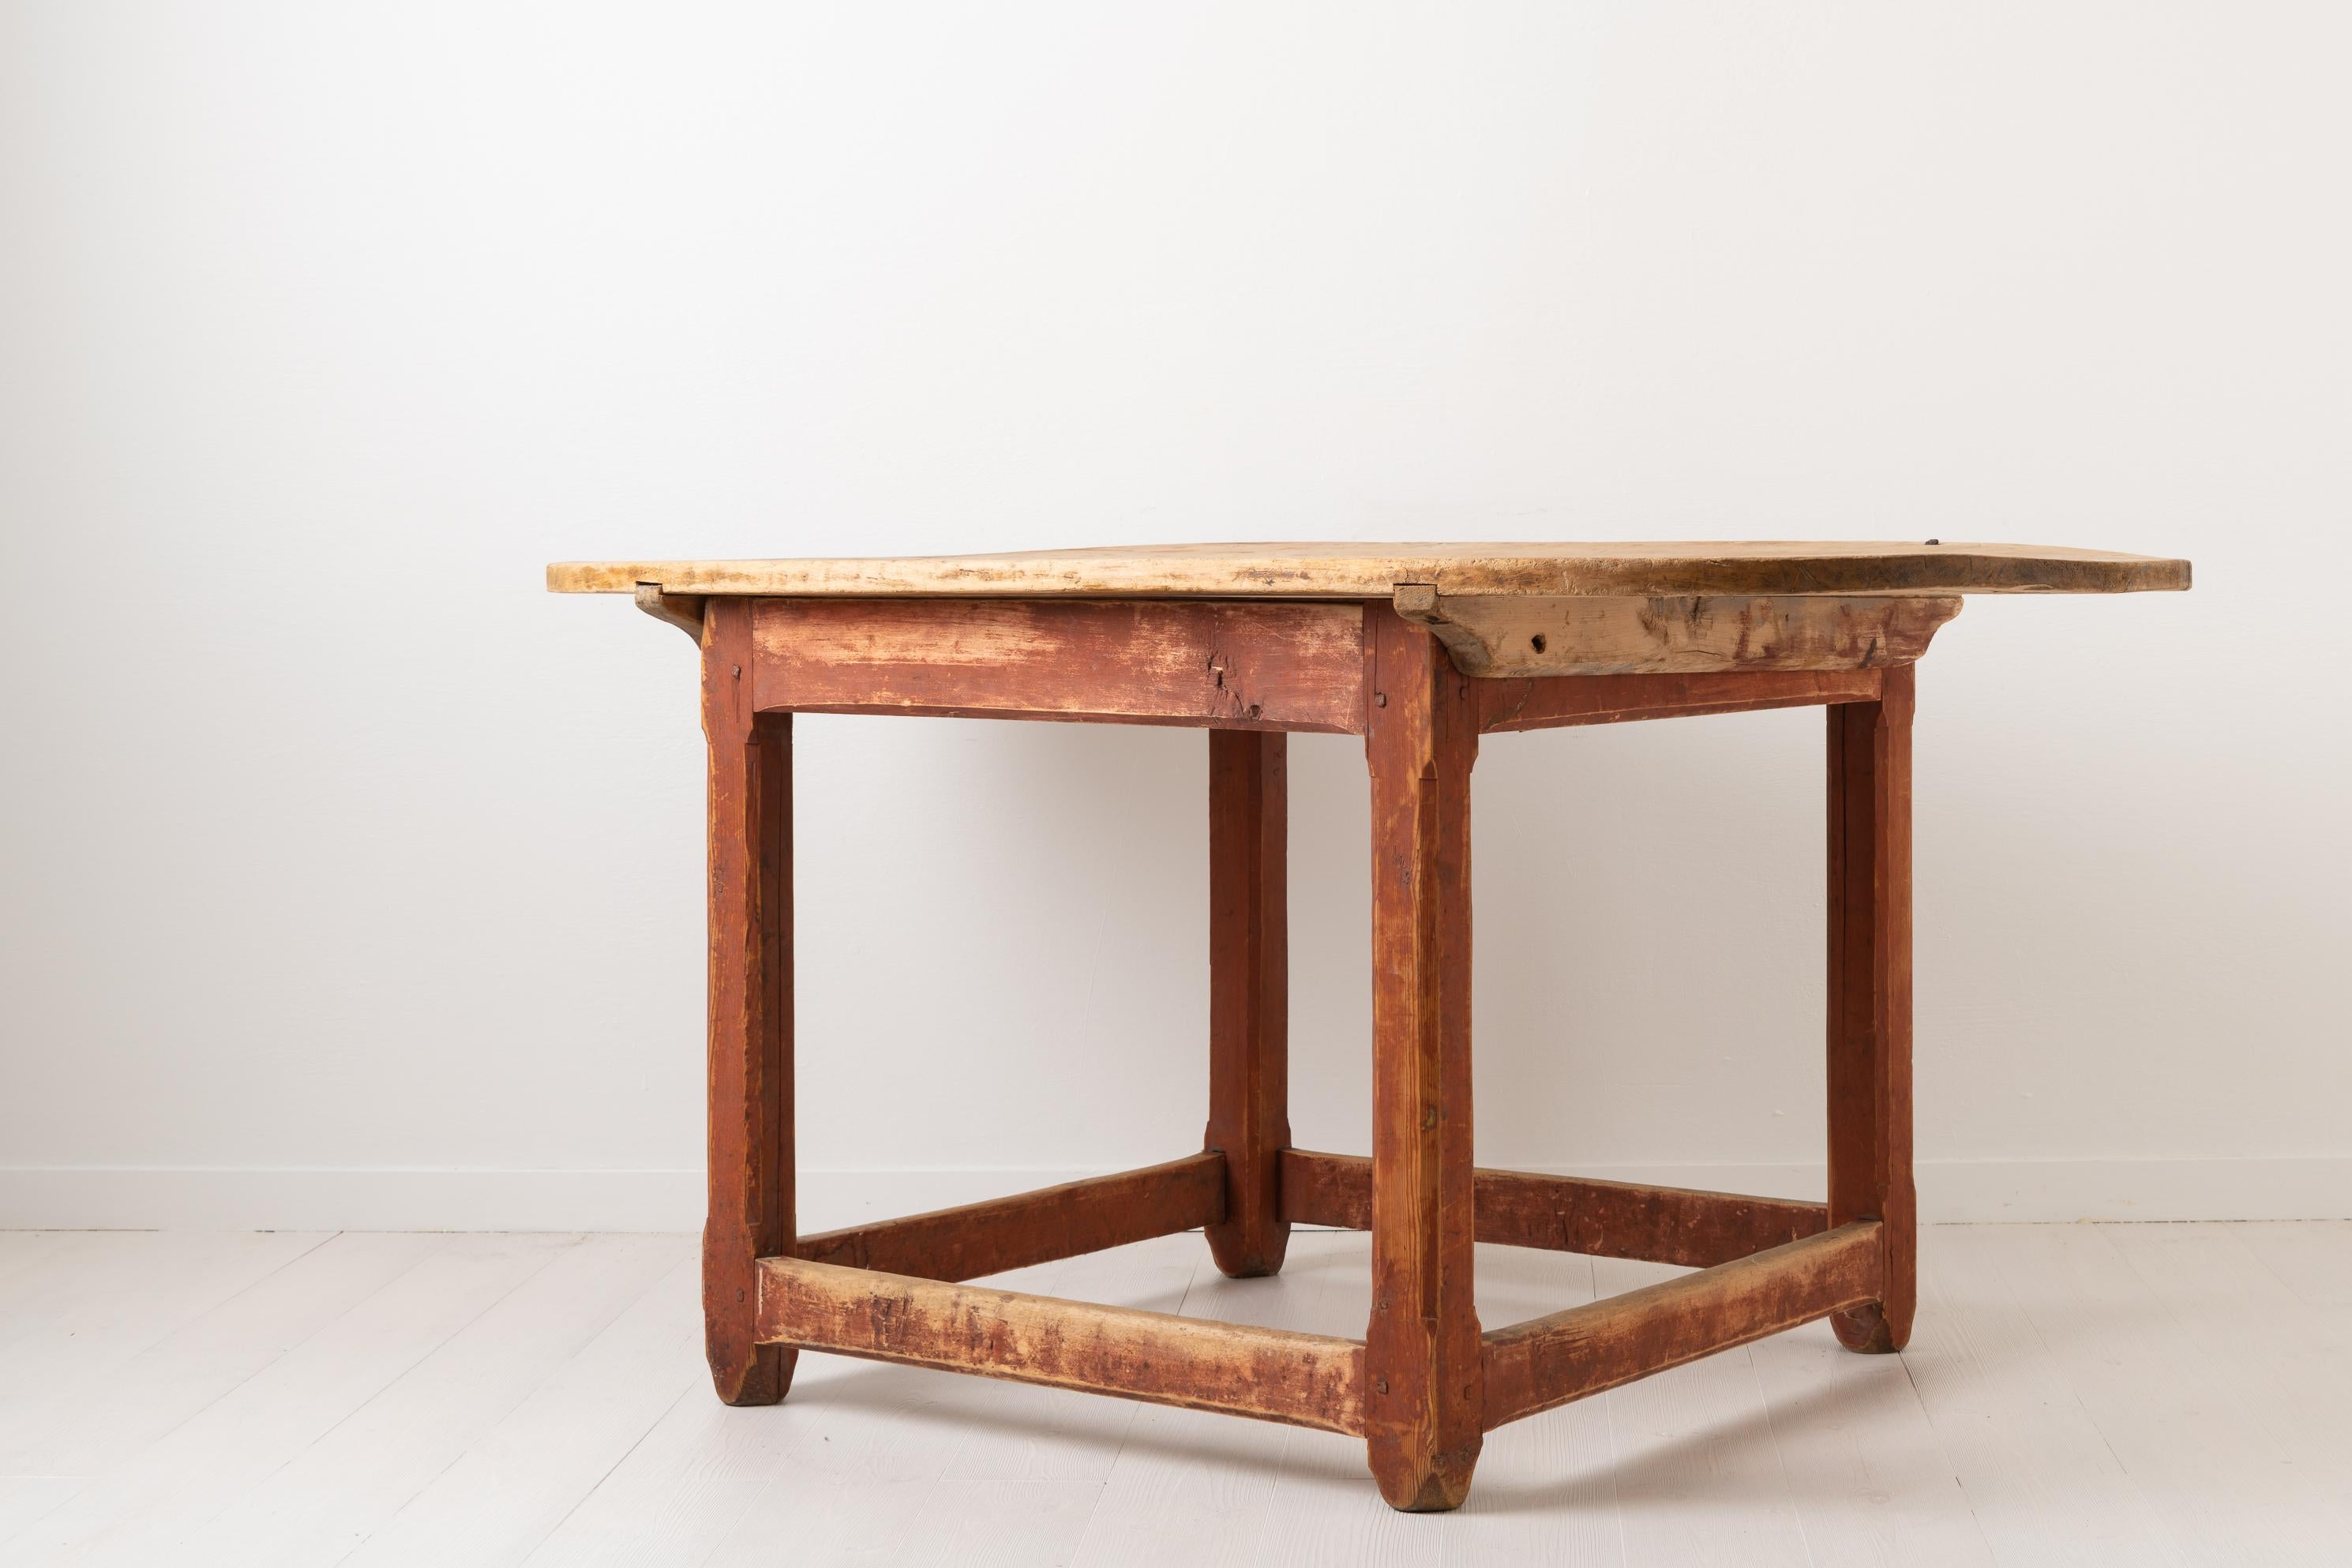 Late 1700s Swedish Rustic Baroque Centre Table In Good Condition For Sale In Kramfors, SE